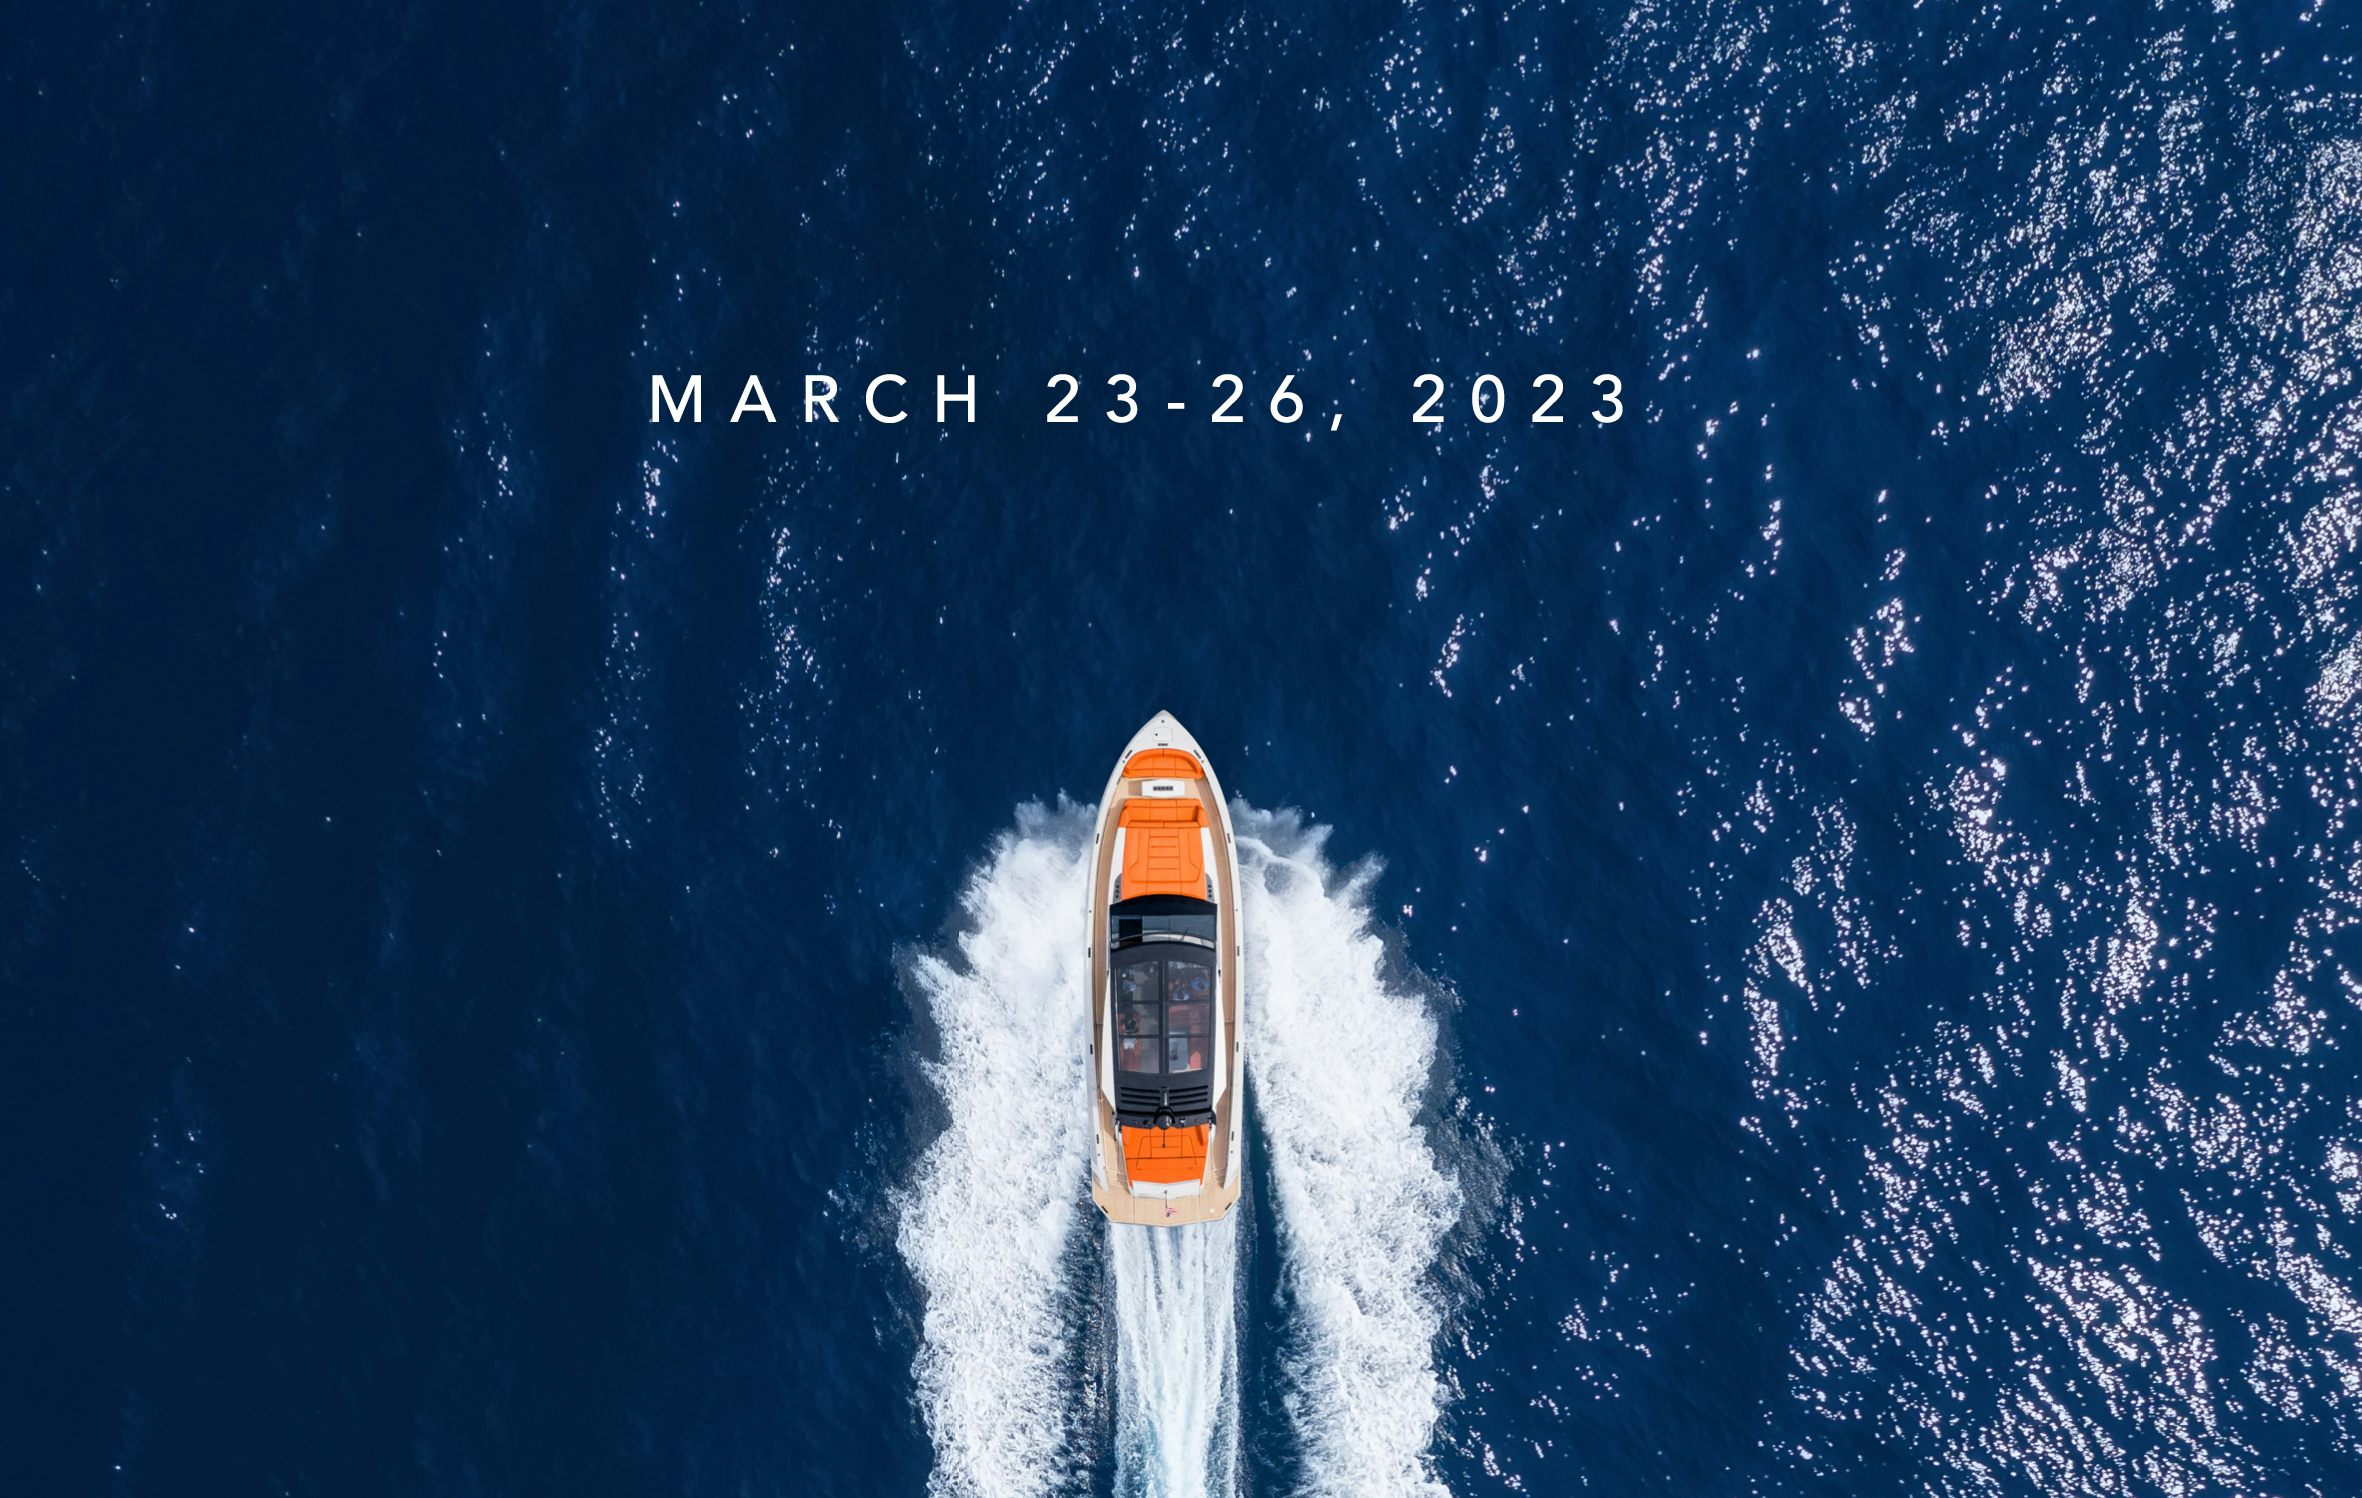 Welcome at the Palm Beach International Boat Show 2023.